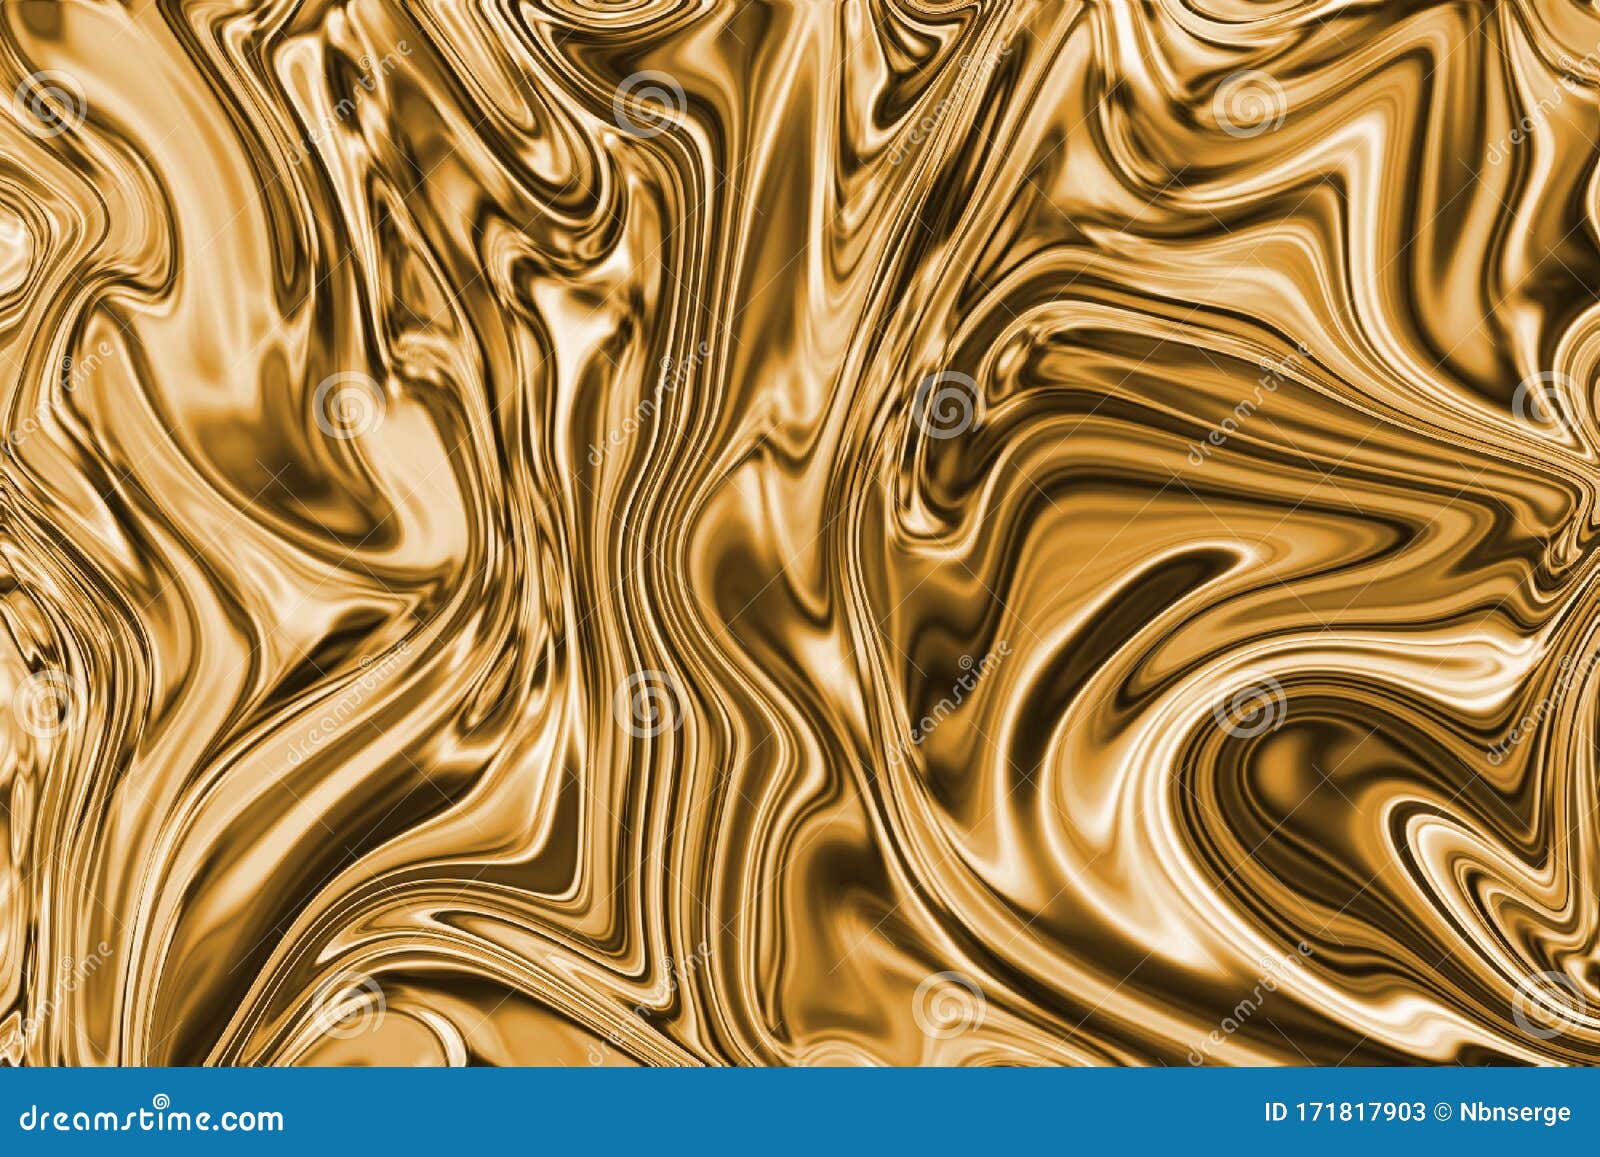 Texture of Pure Liquid Gold, Background for Wallpaper, Decoration ...